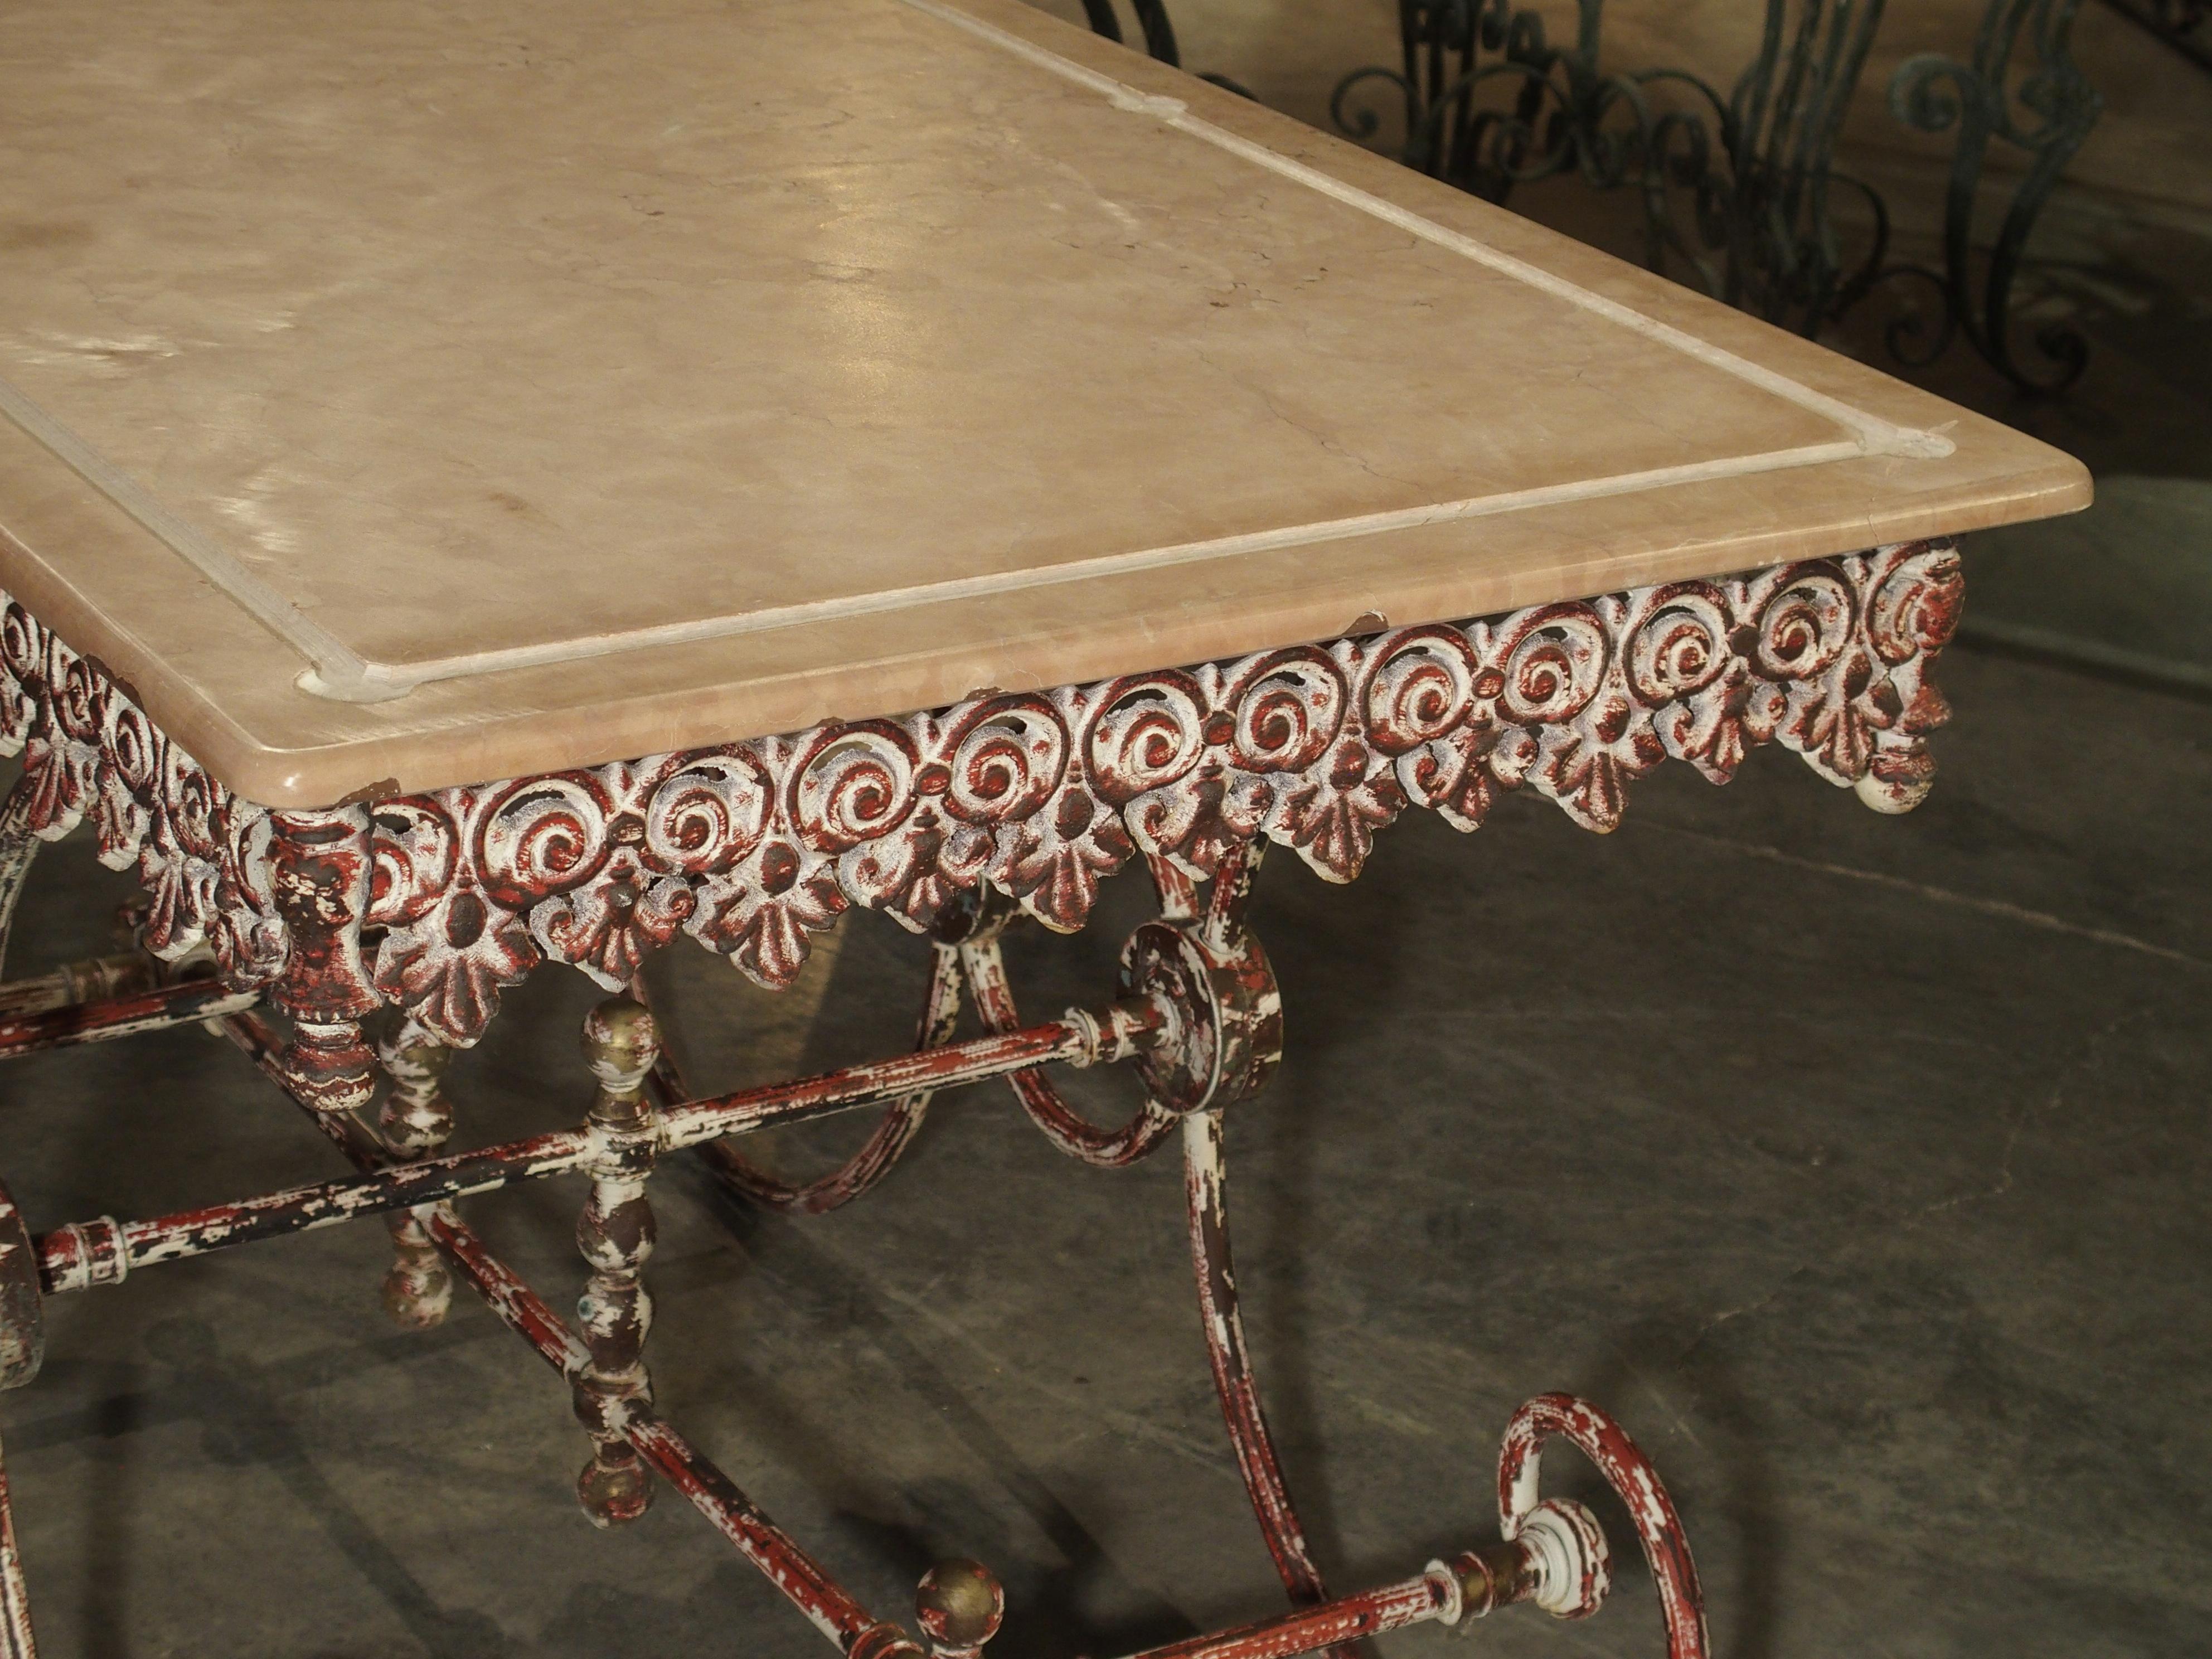 20th Century French Iron and Marble Pastry Table